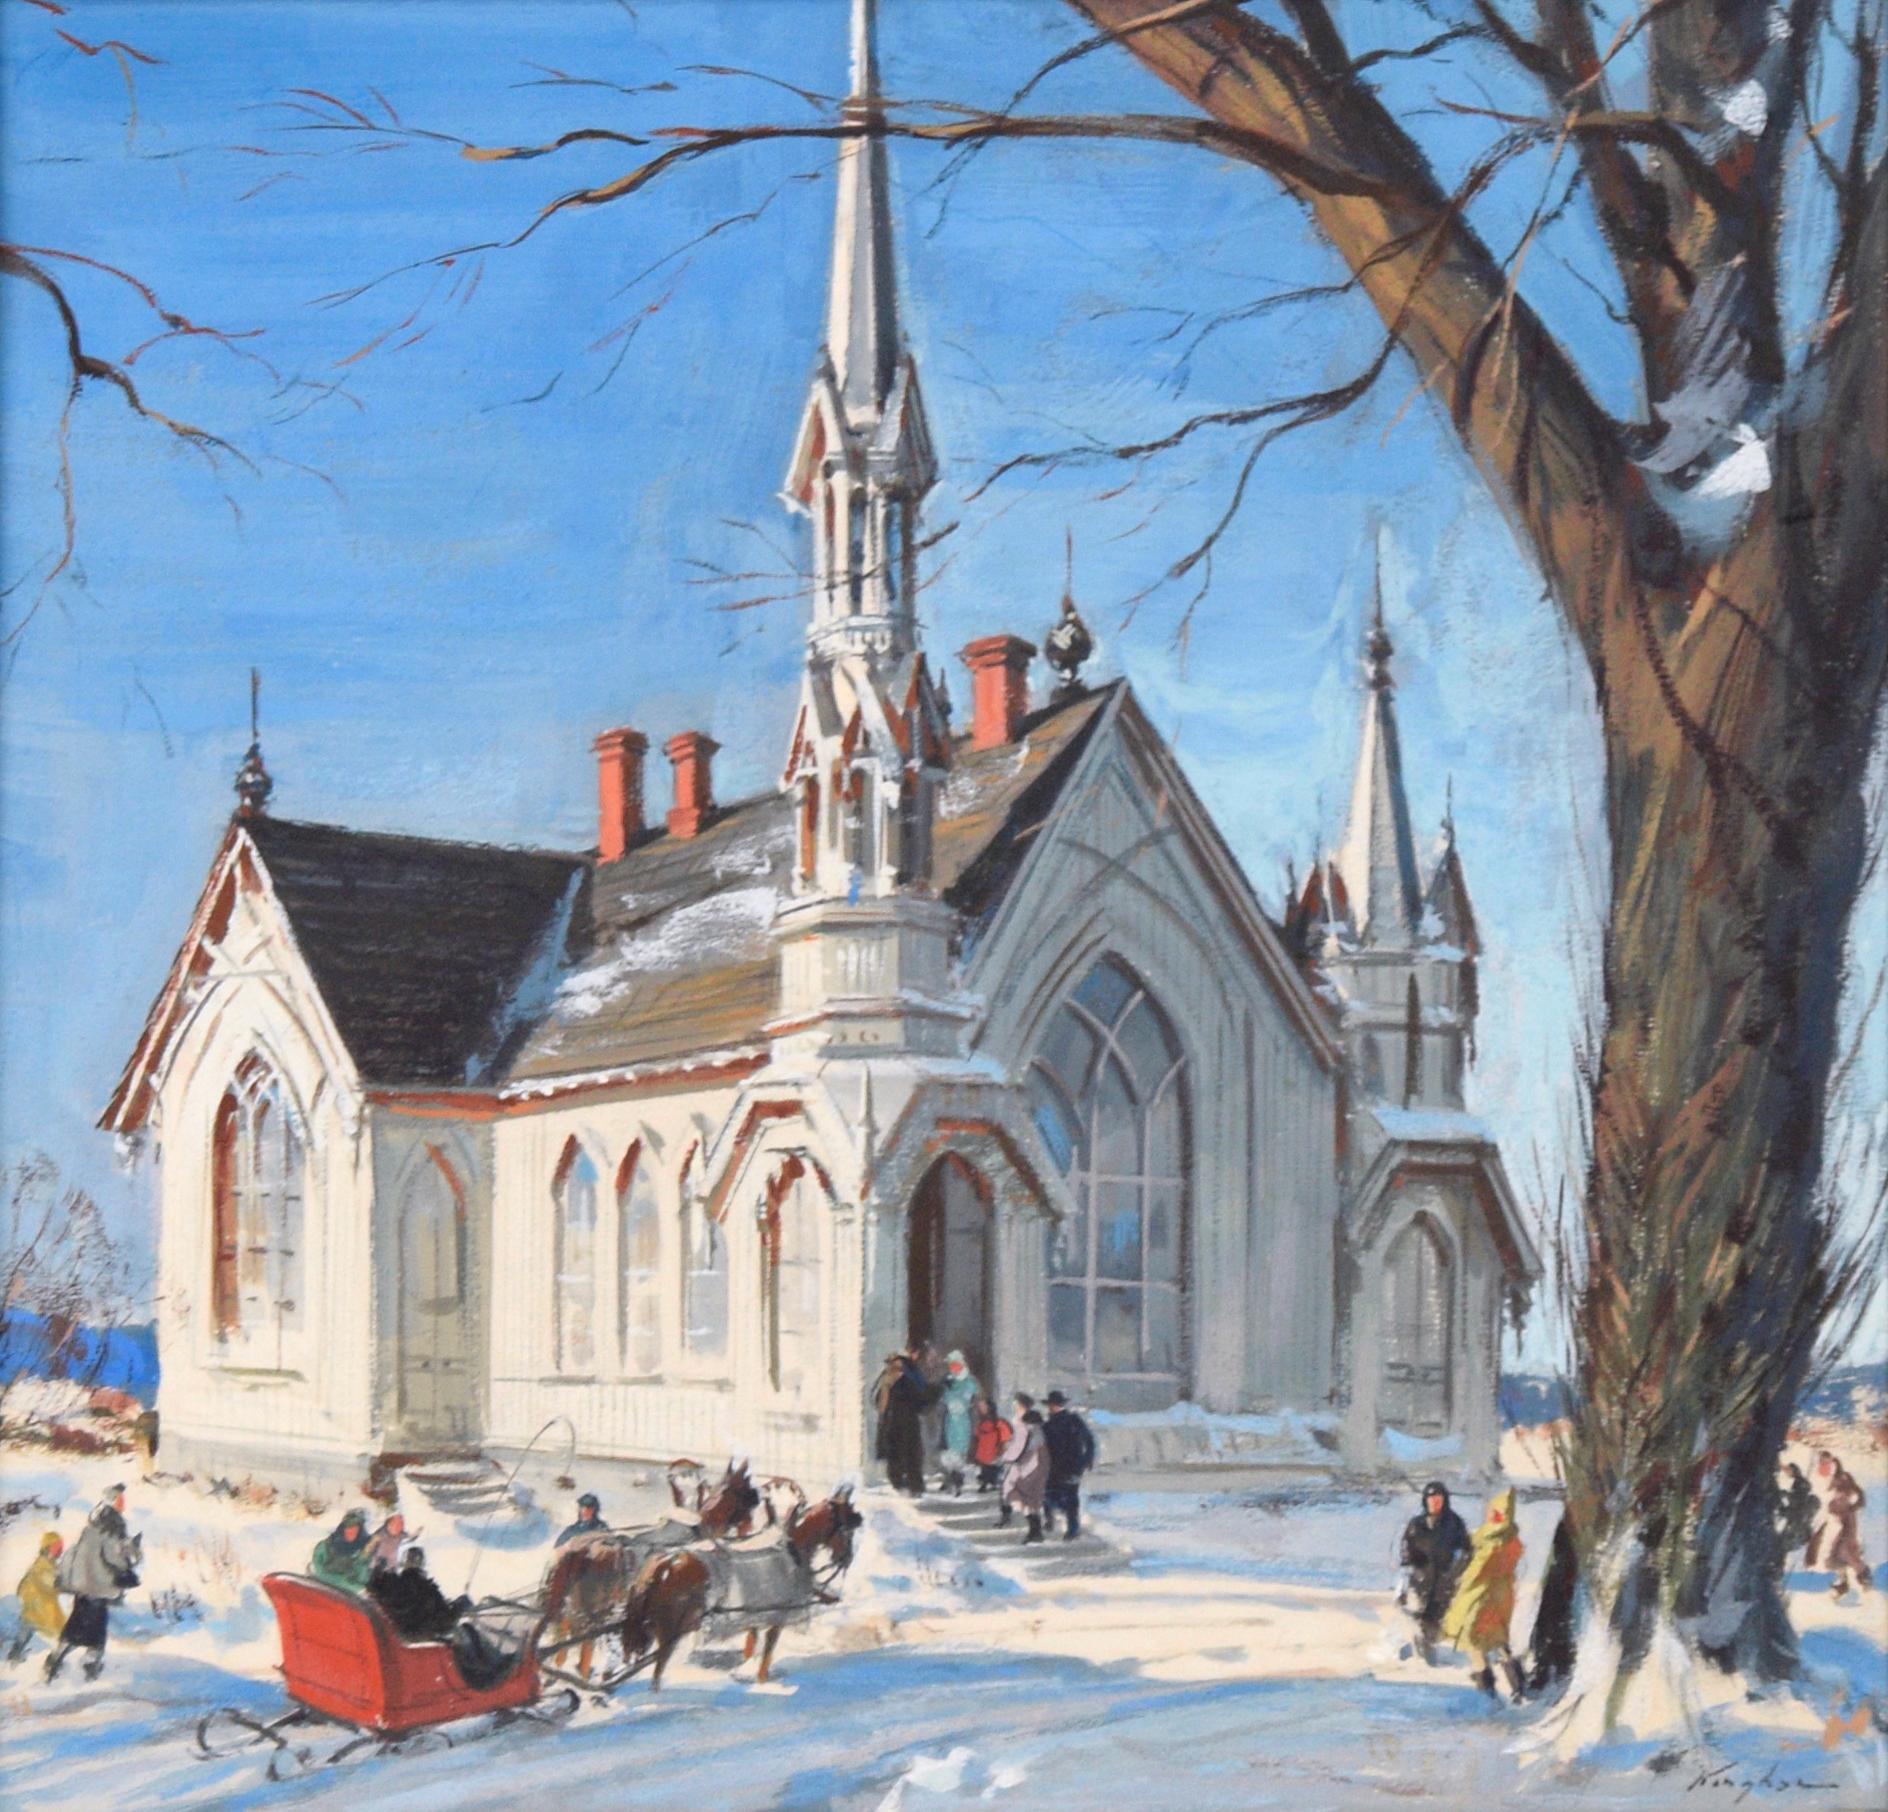 Arriving at Church in Winter - Figurative Realistic Illustration - Painting by Charles Kinghan